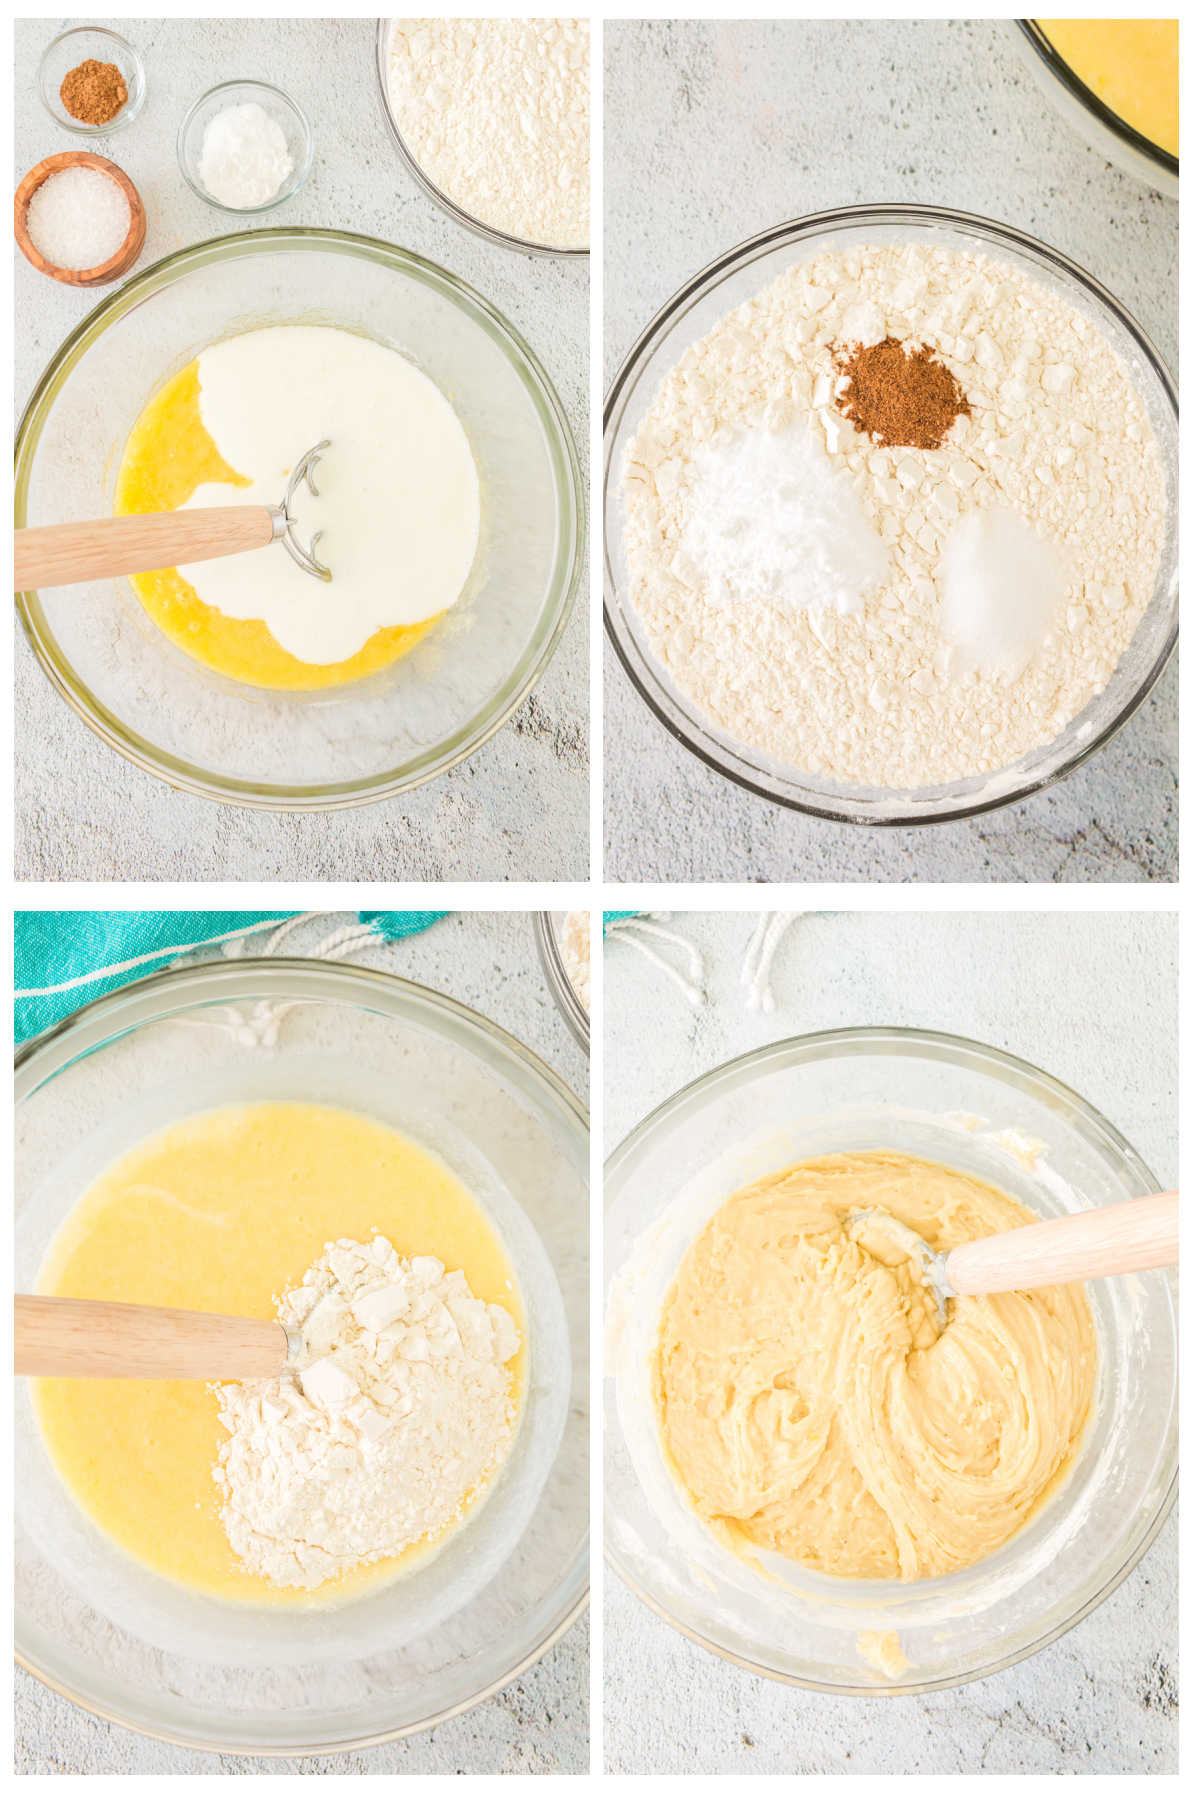 Step by step images showing how to mix the donut batter.